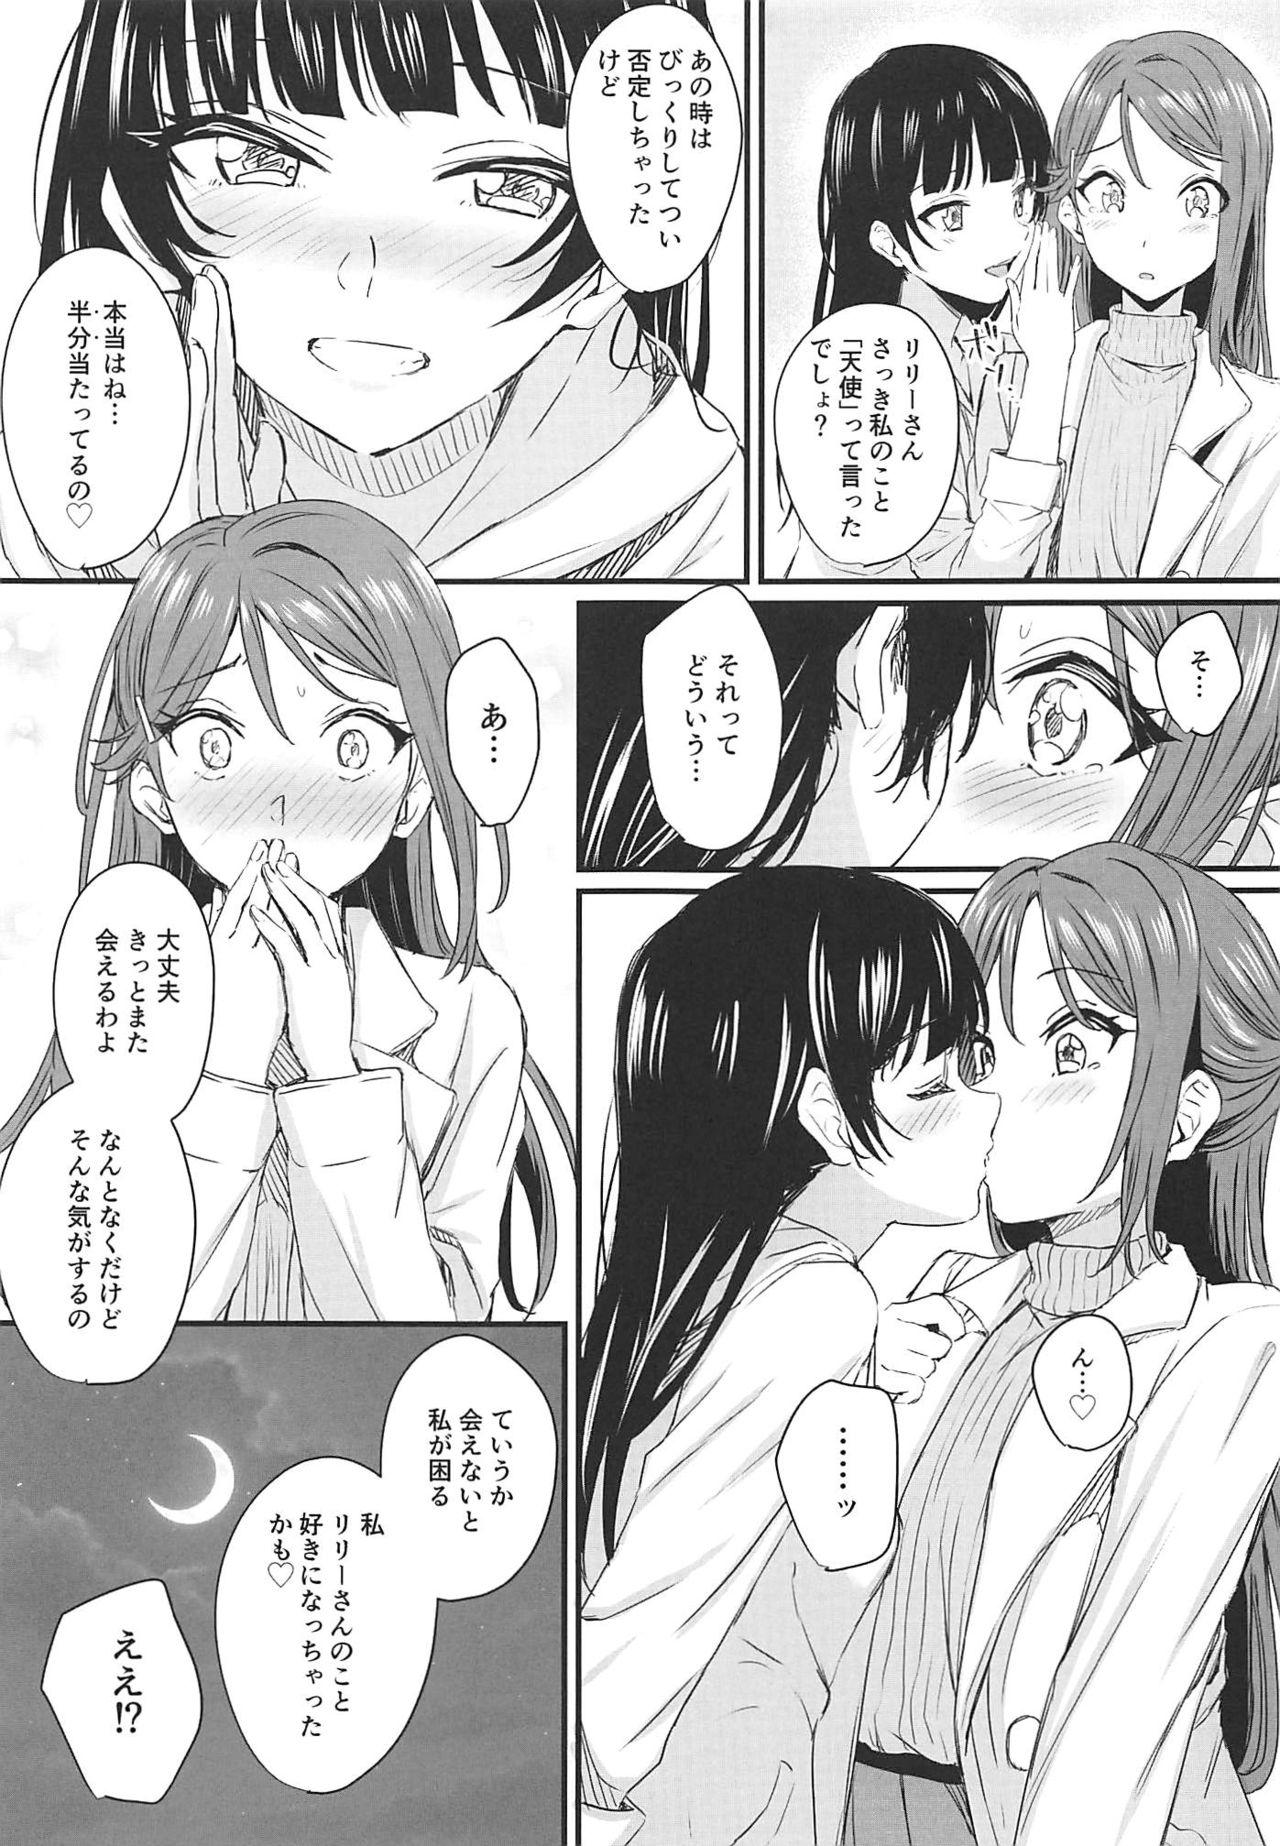 Riding INSTANT LOVE STORY - Love live sunshine Pool - Page 24